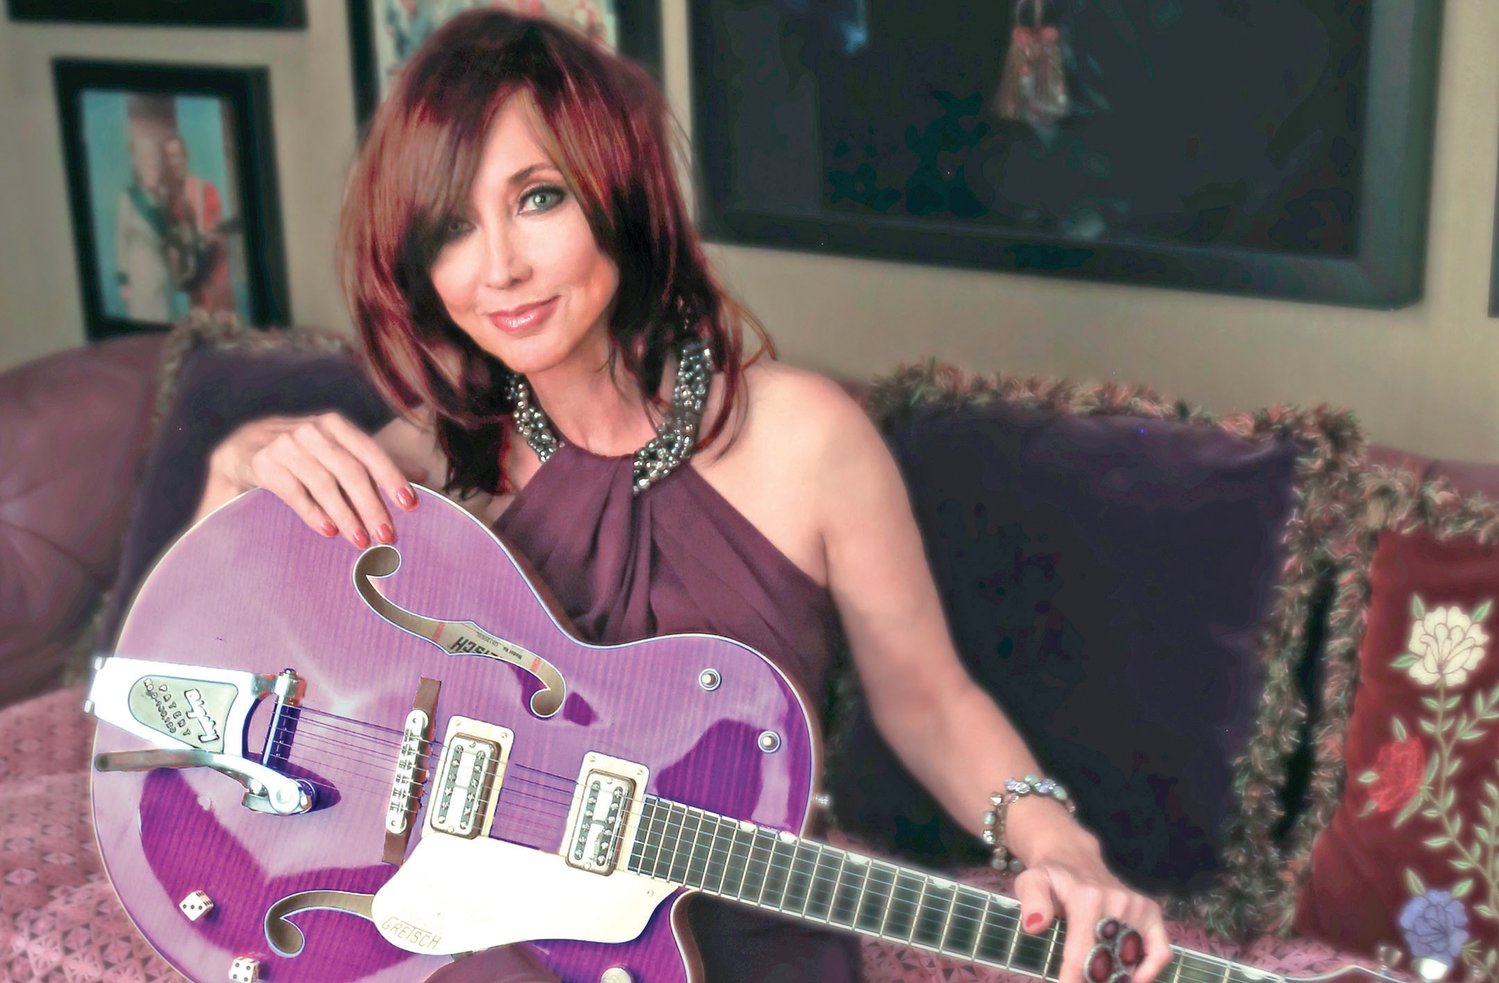 The Pam Tillis Trio will be performing at DHCAC on March 4.